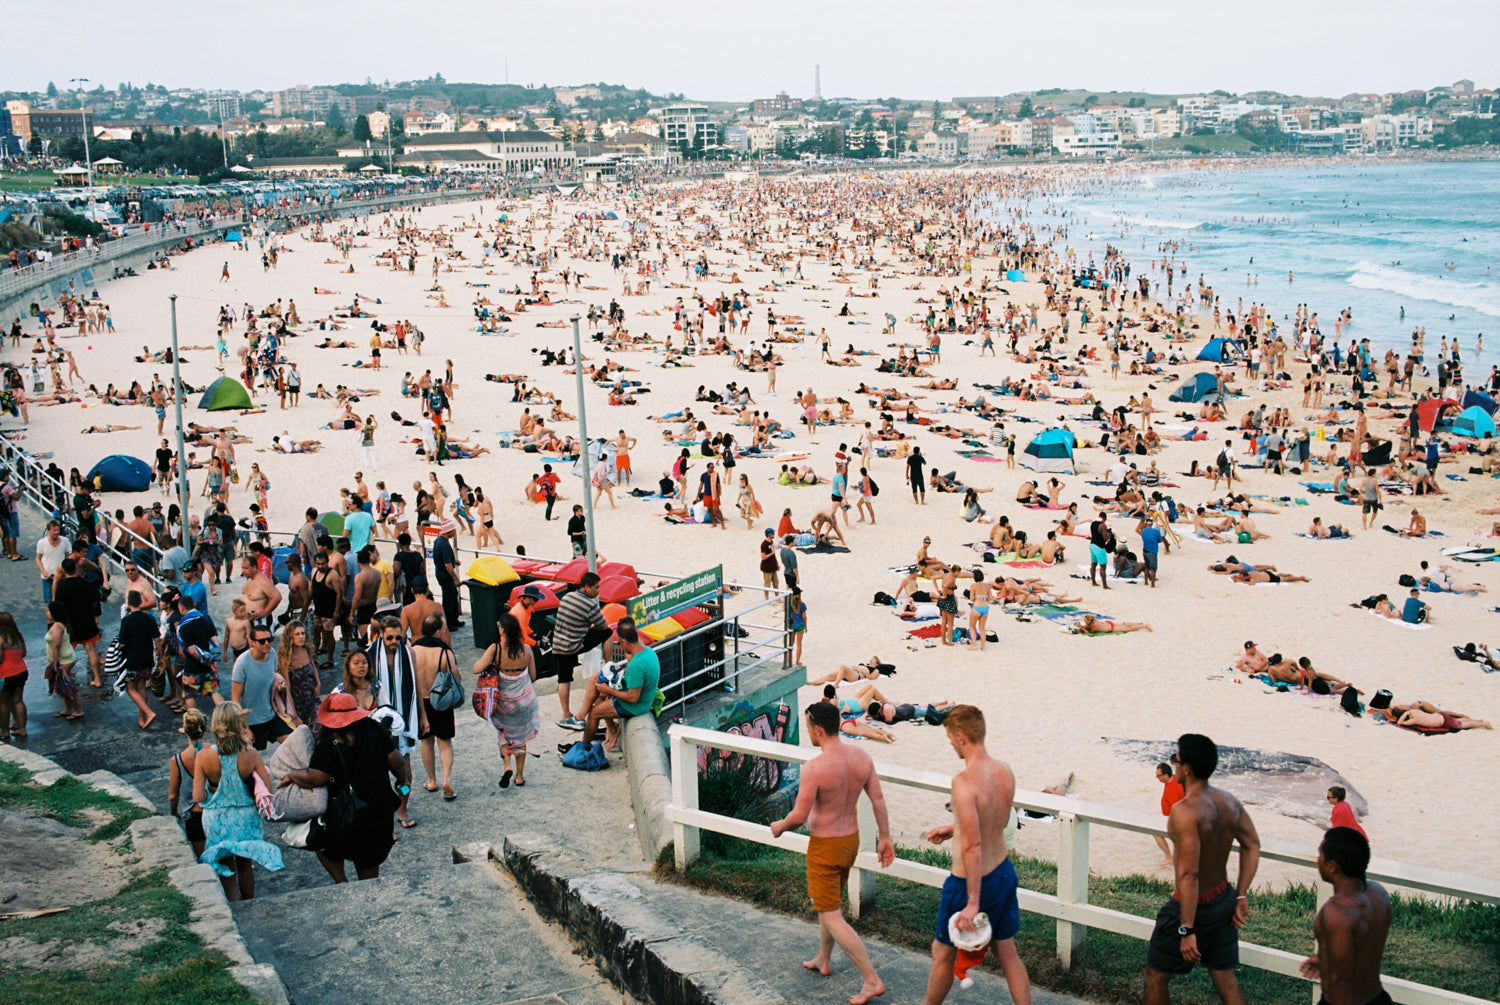 “A photo of New Years day at Bondi Beach, Thousands of people on the beach & in the water. People cue to have a shower in a long line. People are wearing bathers, it’s a hot day in Sydney Australia”.  Artwork Prints, wall art,  travel Australia, Photographic prints,  Framed artwor,k Beach, Photography Photography for sale Film photography Vintage photo style,  Interior design, Film photography, film photography, Bondi beach Sydney, Street photography prints,